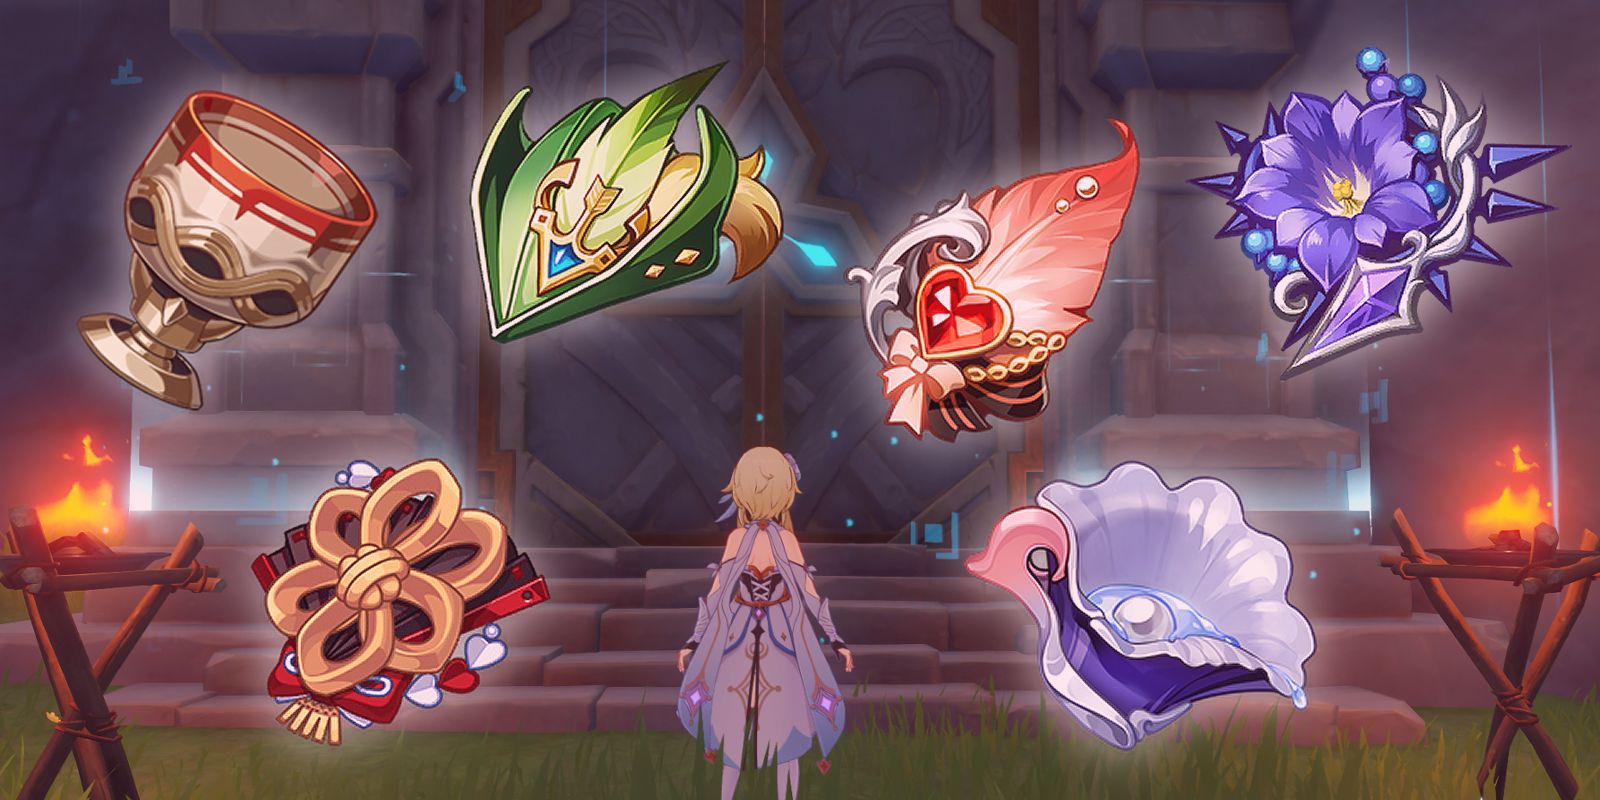 Genshin Impact's Traveler stands in front of a domain with multiple artifact pieces surrounding her.